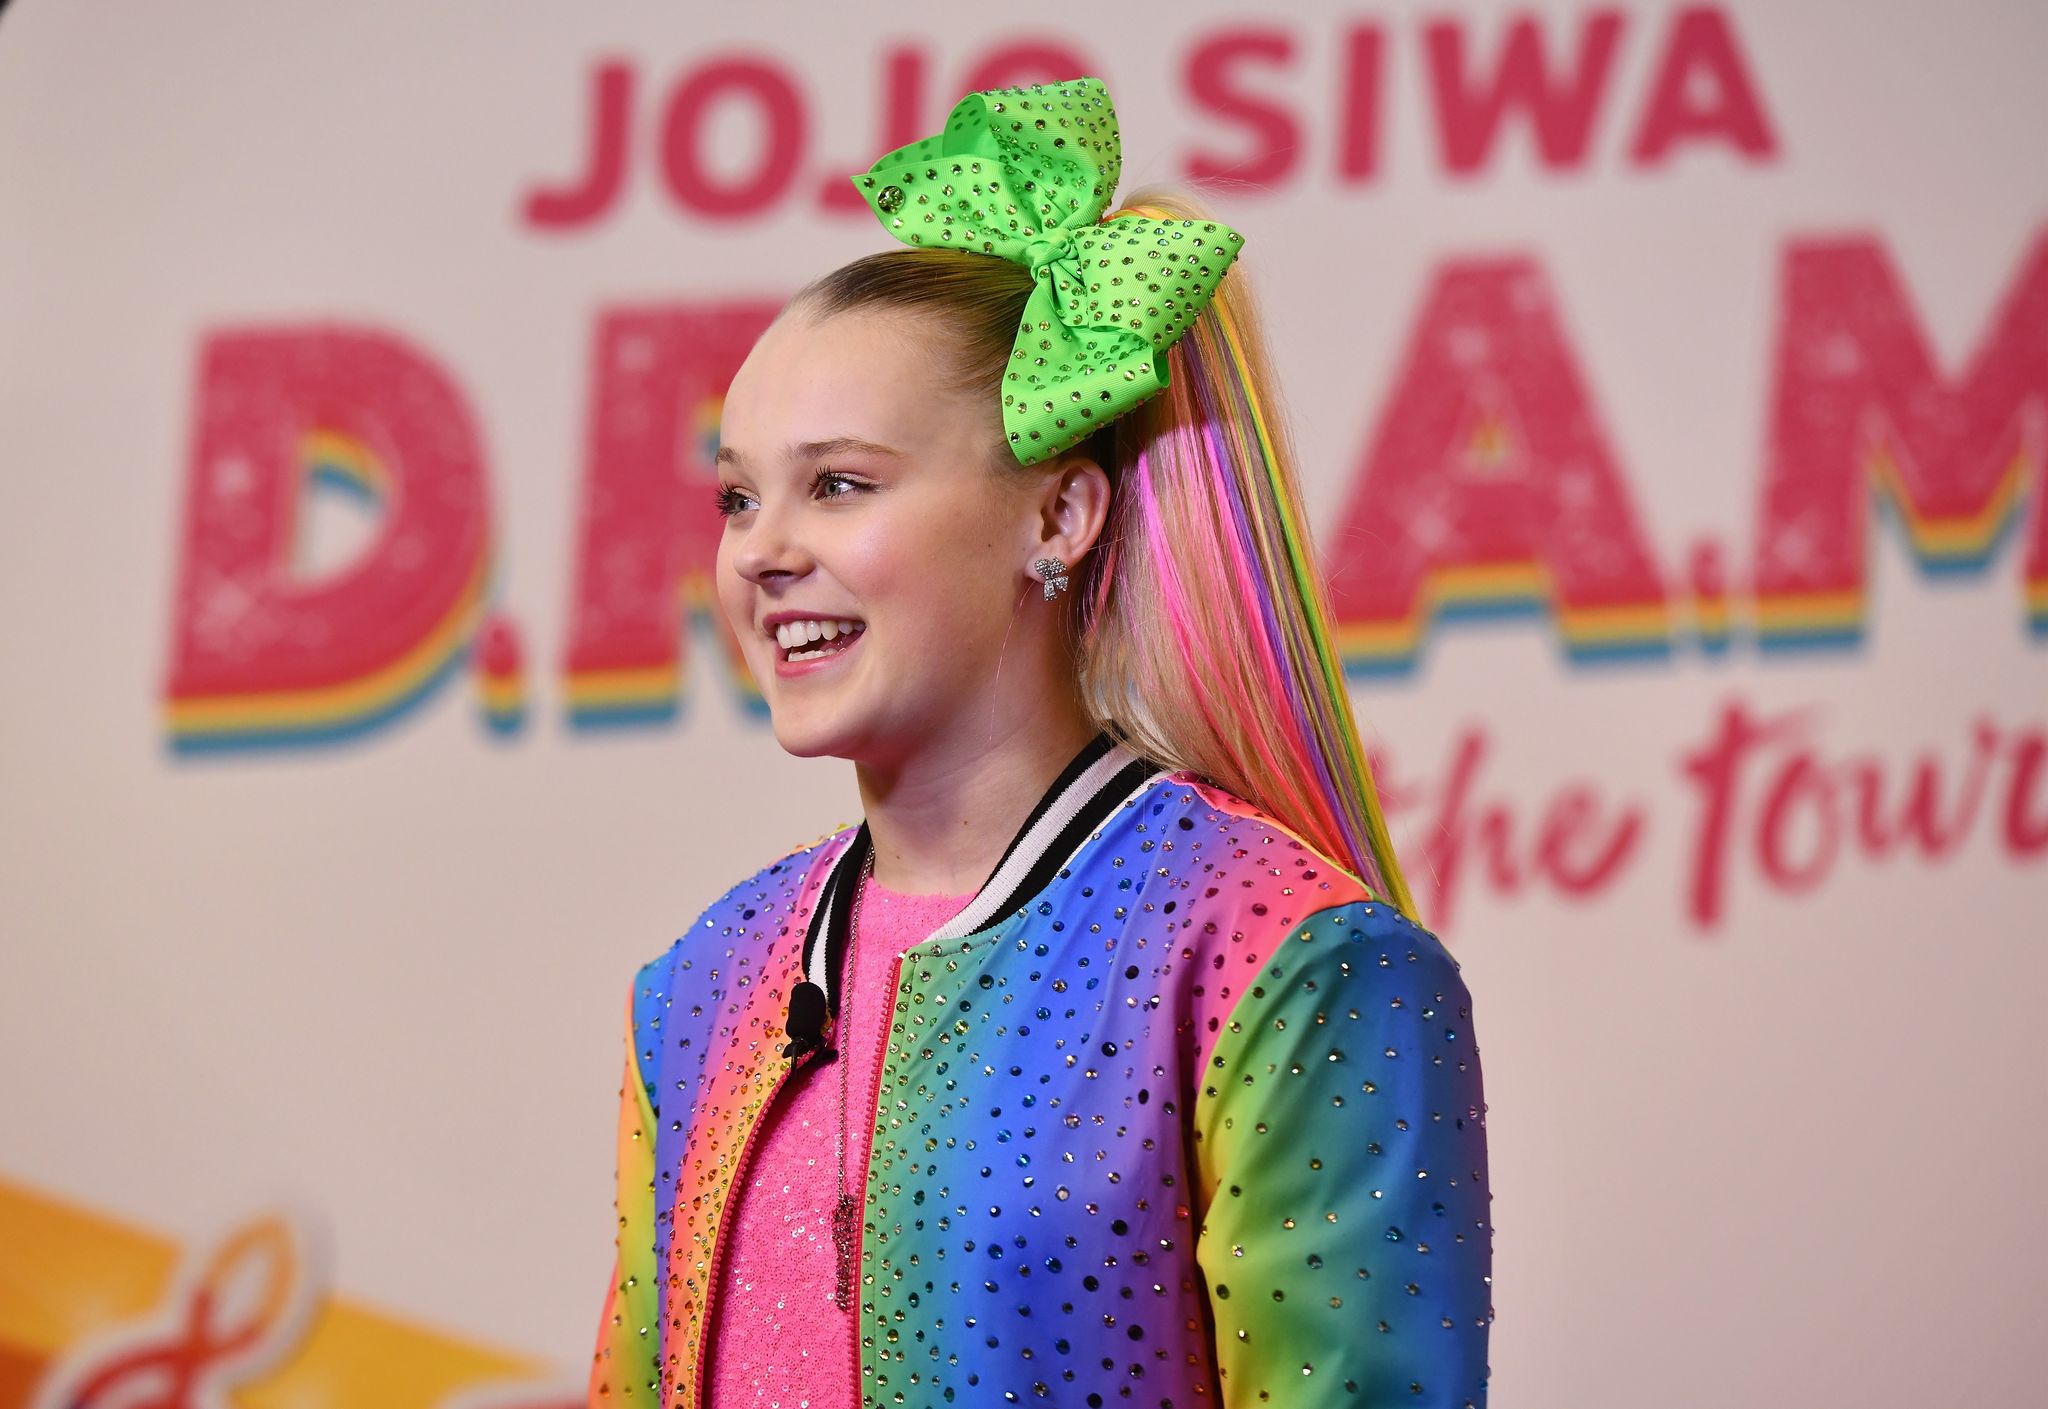 JoJo Siwa announces her upcoming EP and D.R.E.A.M. Tour at Sugar Factory, New York on November 7, 2018. | Photo: Getty Images